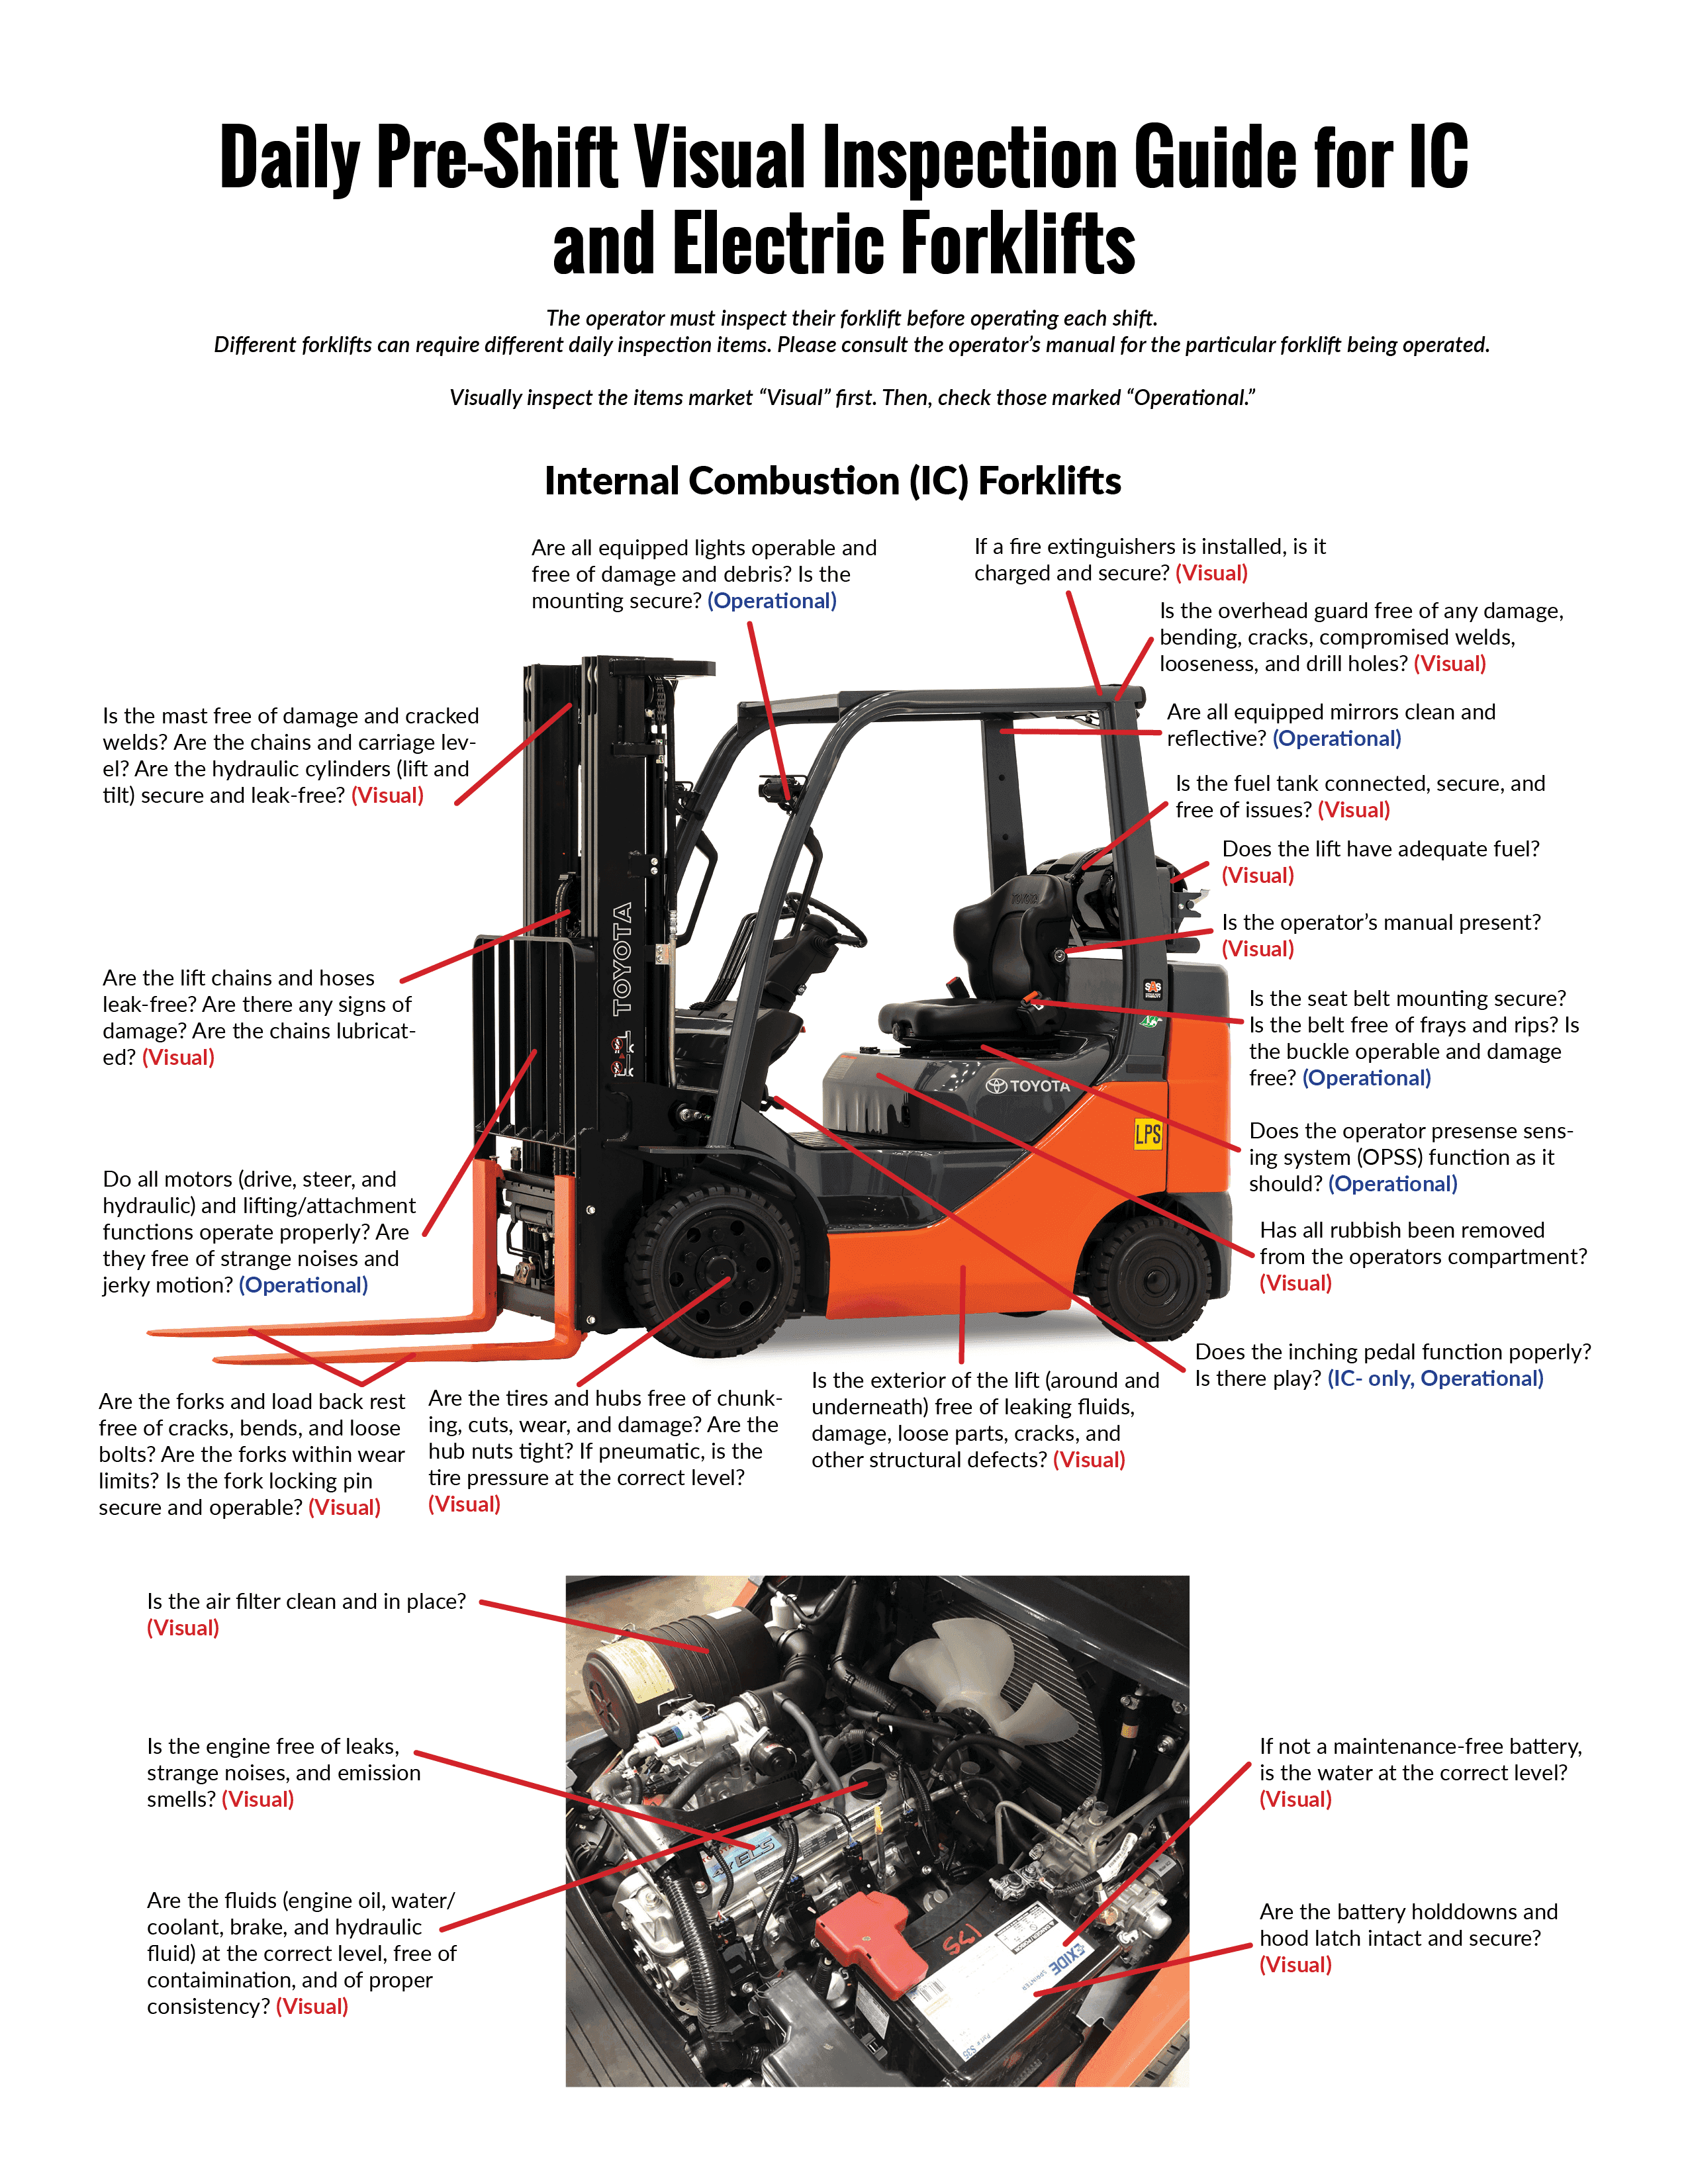 forklift-maintenance-your-complete-guide-to-maximizing-uptime-improving-safety-and-saving-money